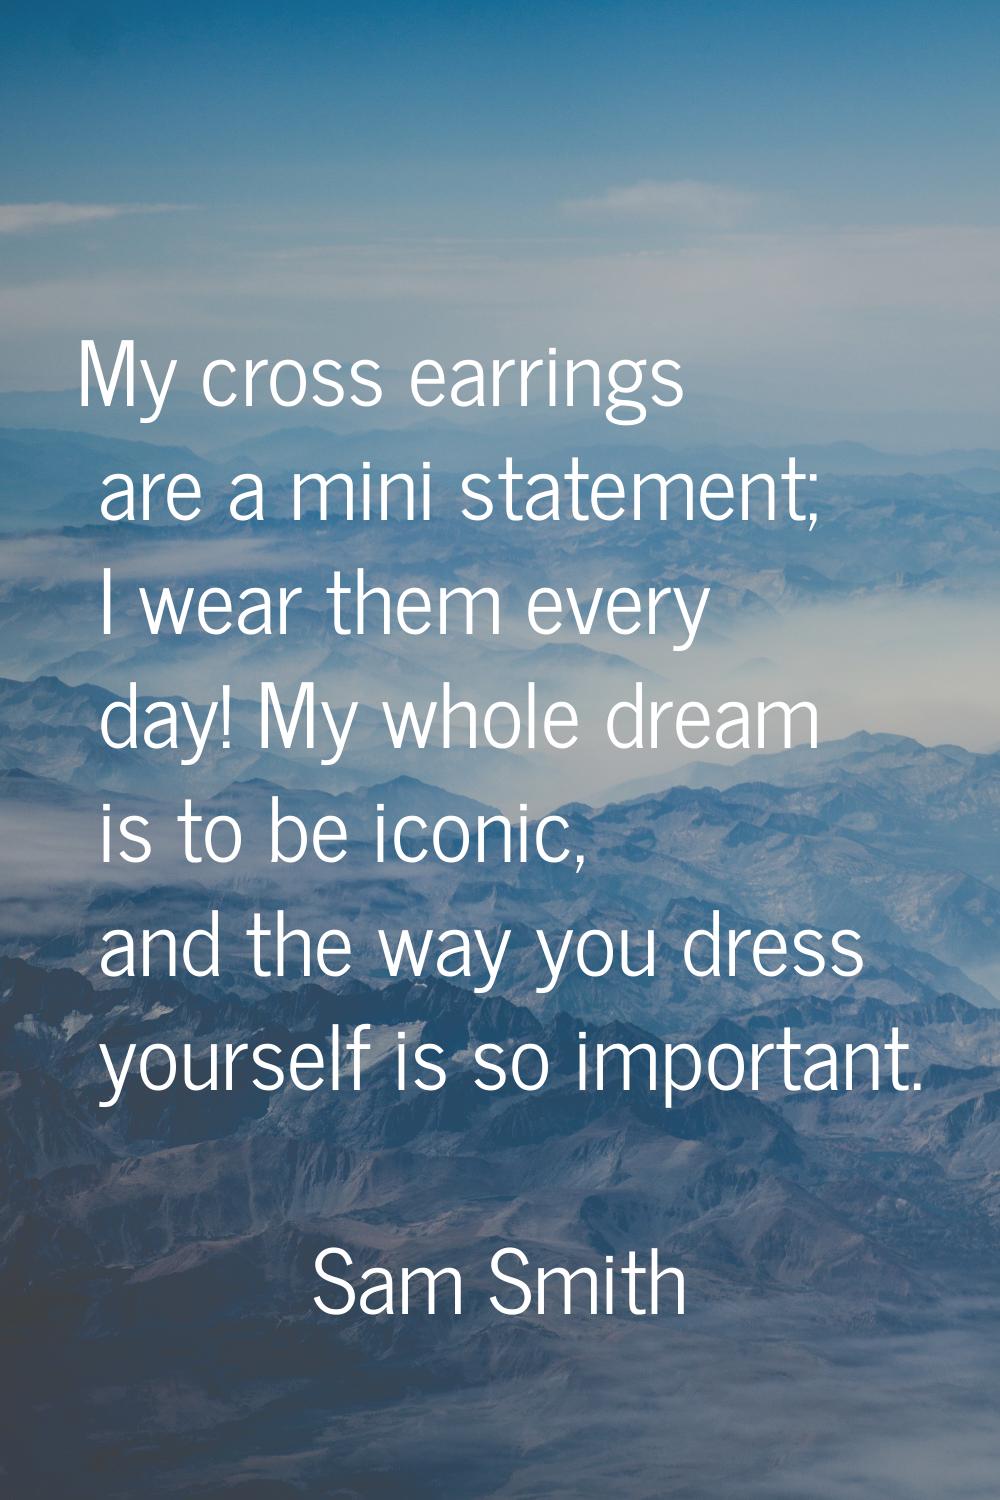 My cross earrings are a mini statement; I wear them every day! My whole dream is to be iconic, and 